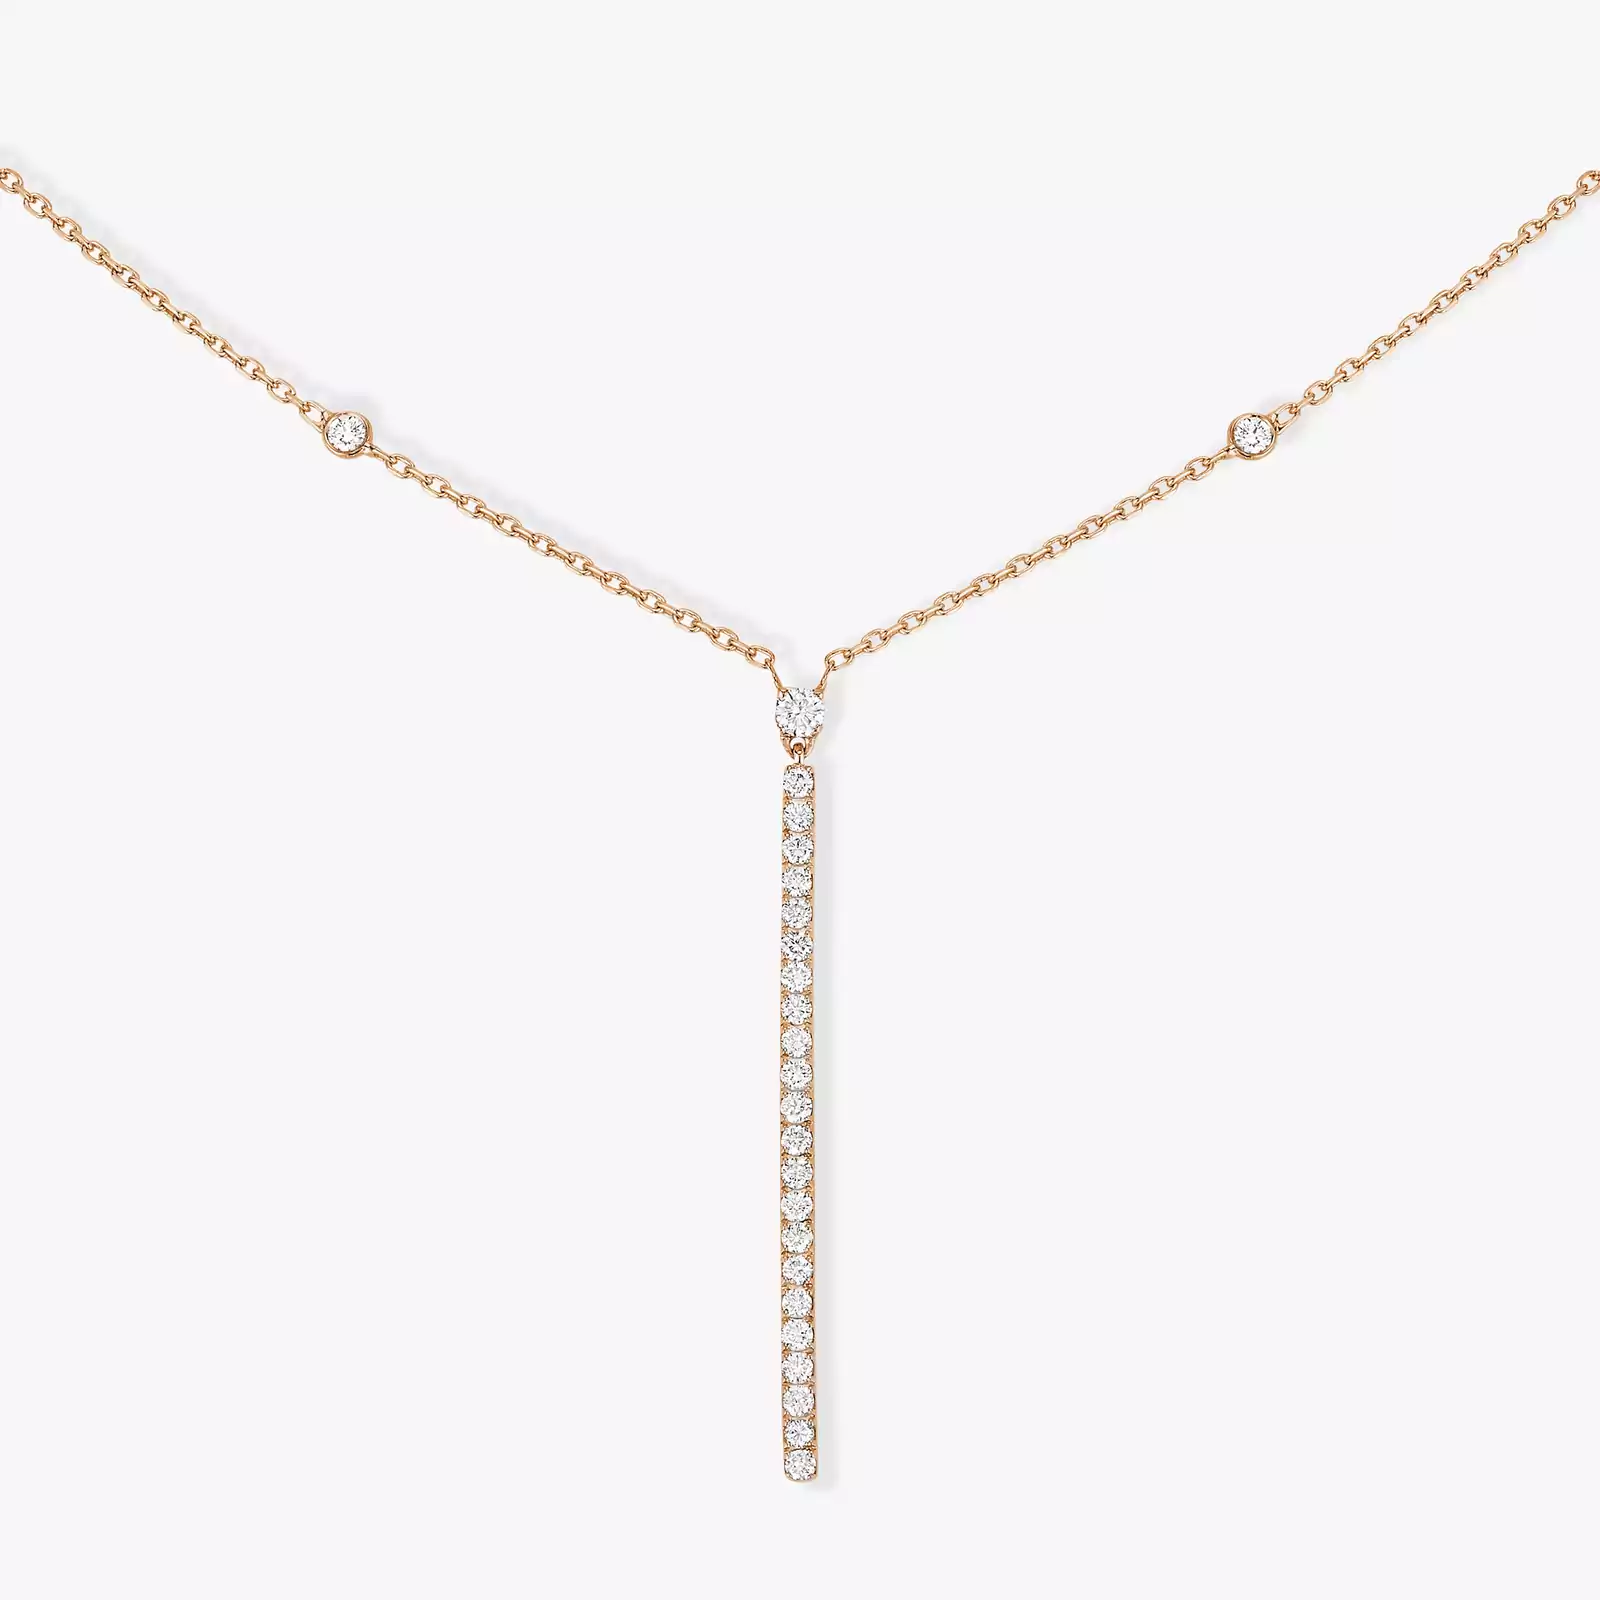 Gatsby Vertical Bar Pink Gold For Her Diamond Necklace 05448-PG